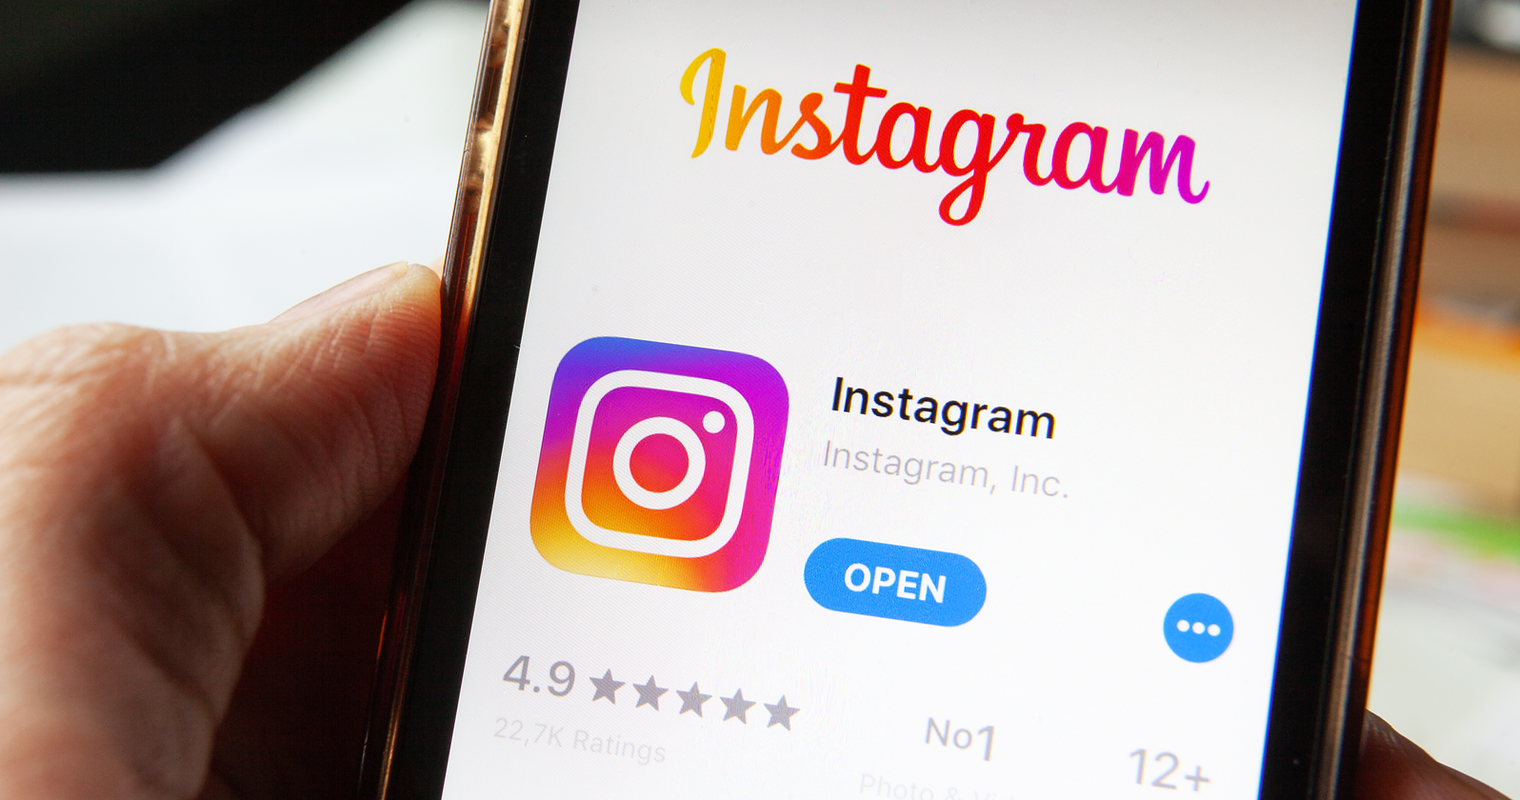 52 Instagram Statistics and Facts for 2021